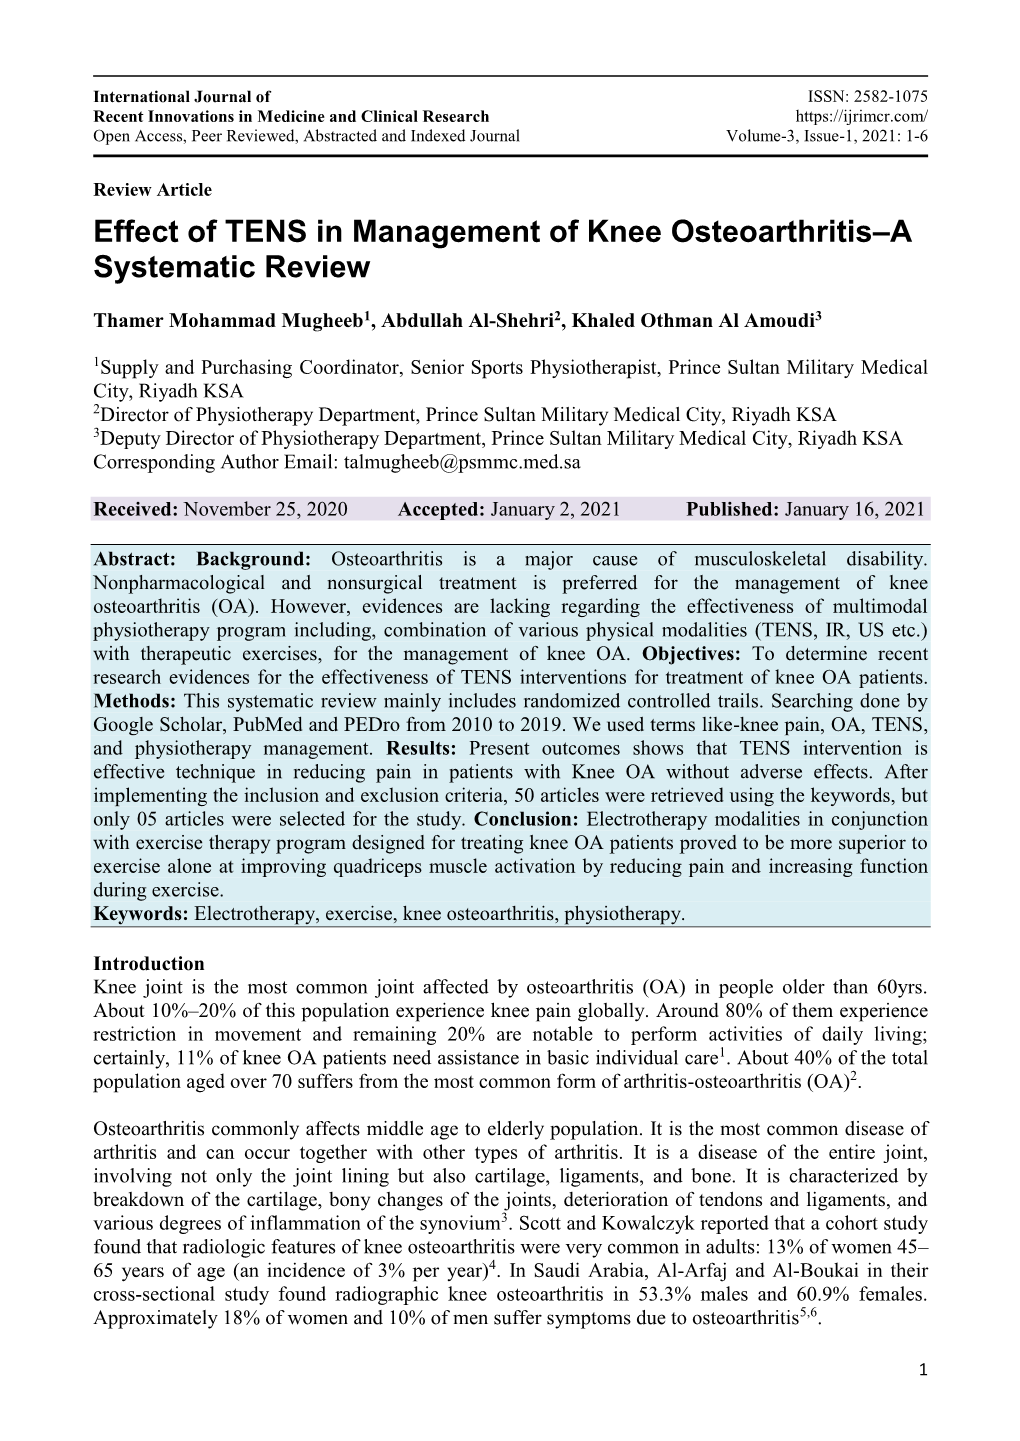 Effect of TENS in Management of Knee Osteoarthritis–A Systematic Review